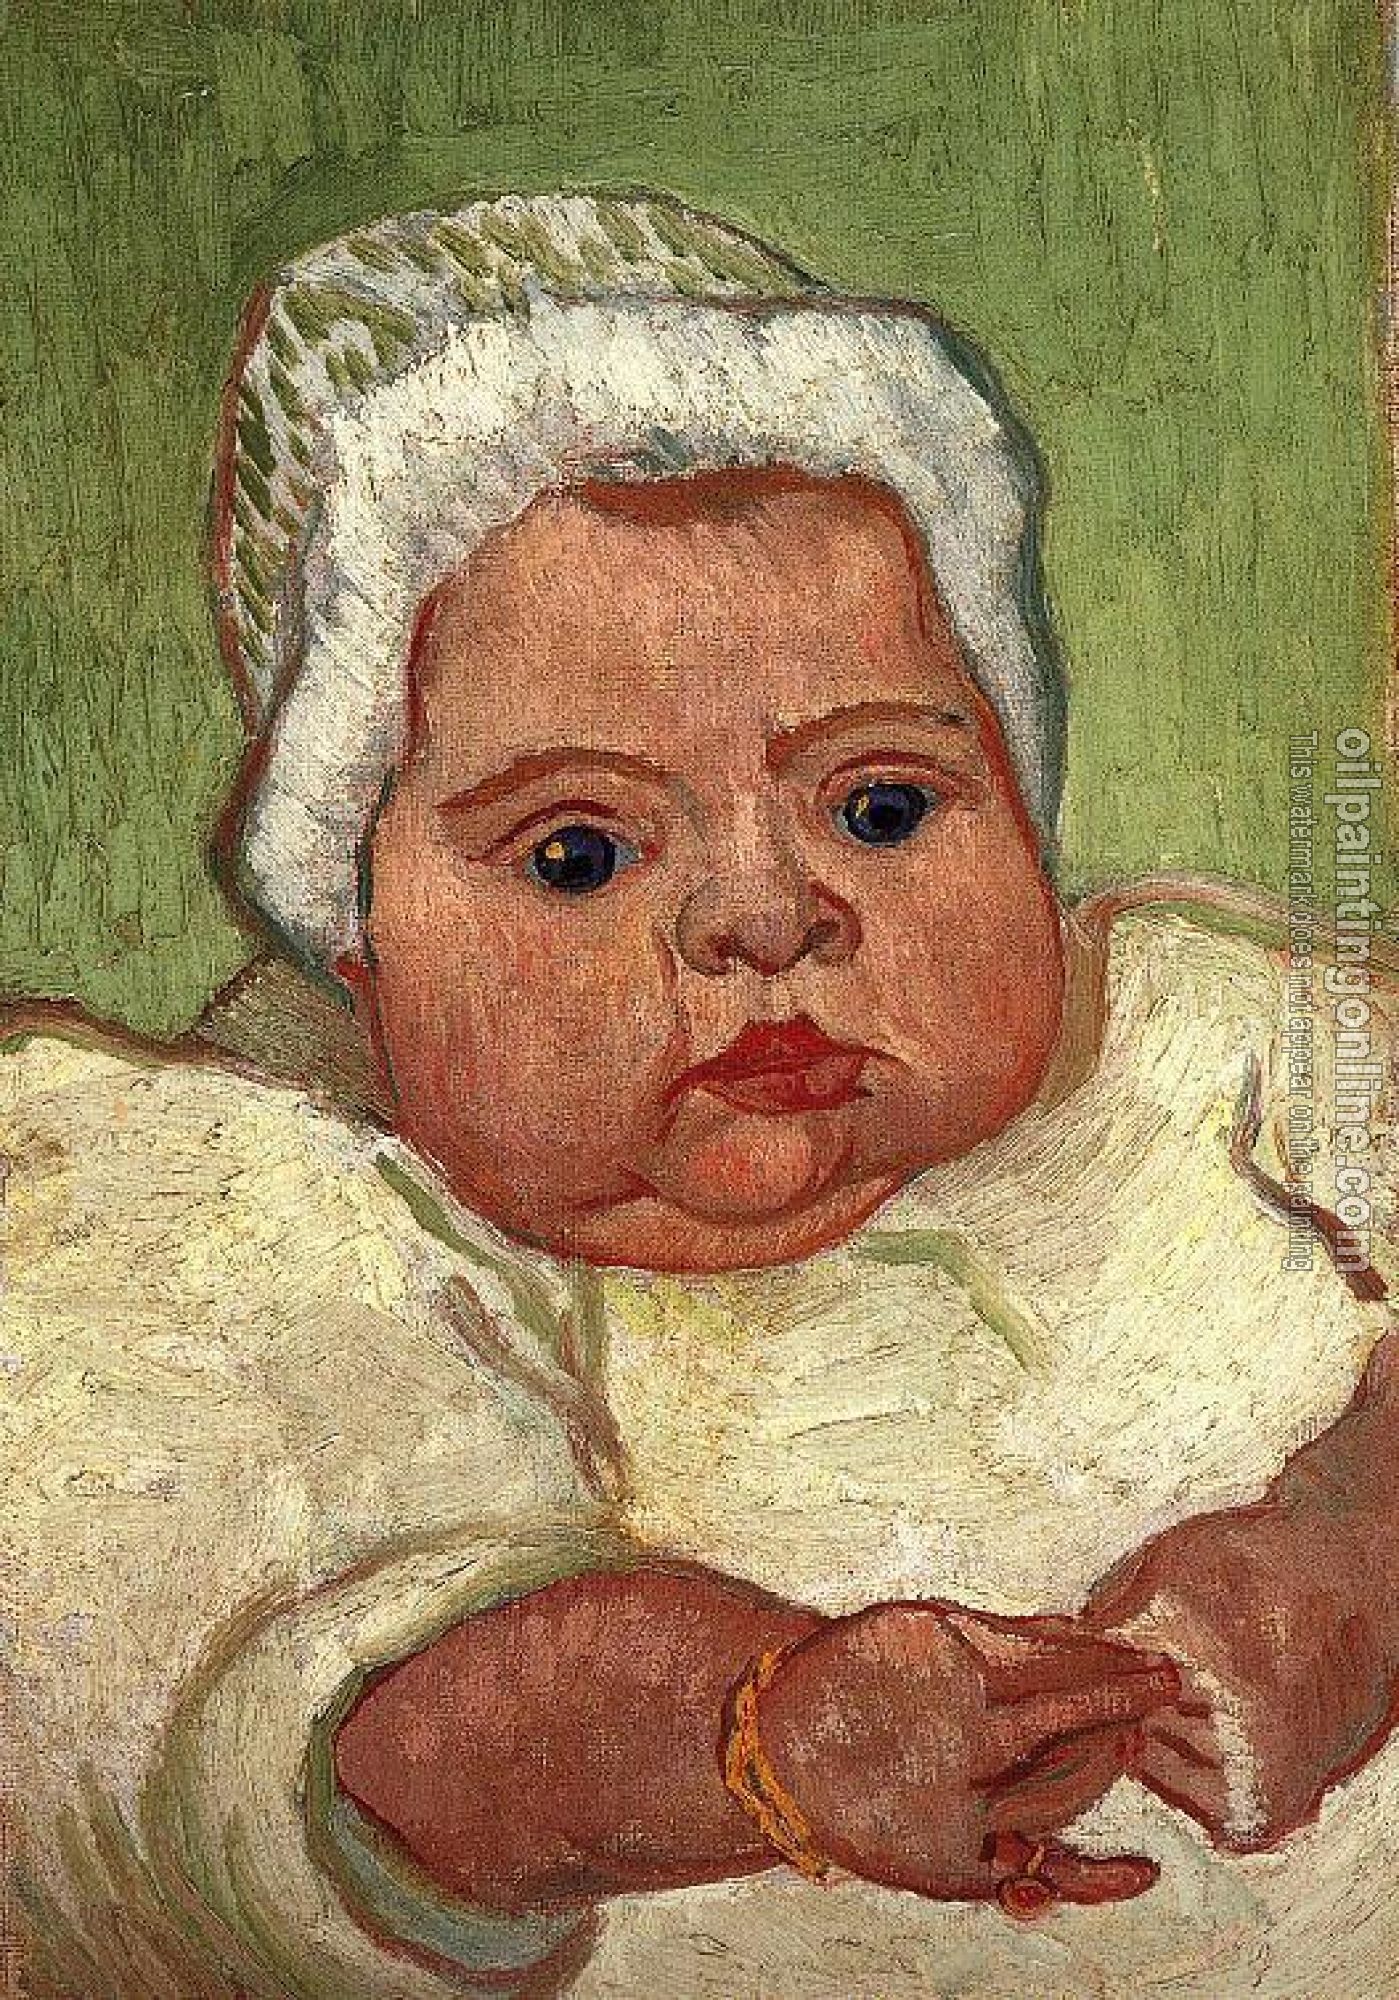 Gogh, Vincent van - The Baby Marcelle Roulin